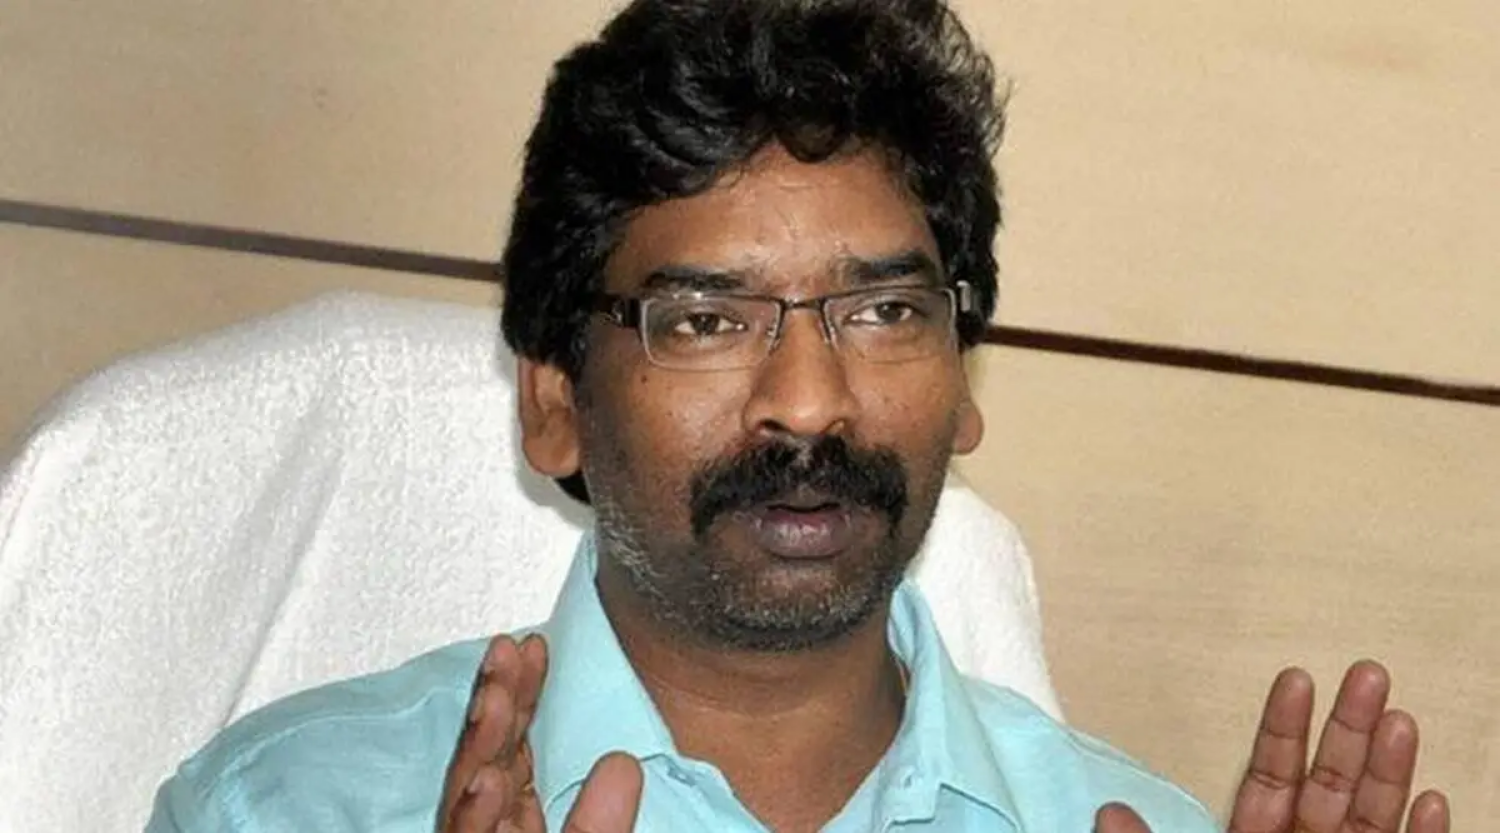 Tribal man ‘flogged’ by cops, Jharkhand CM Hemant Soren orders inquiry